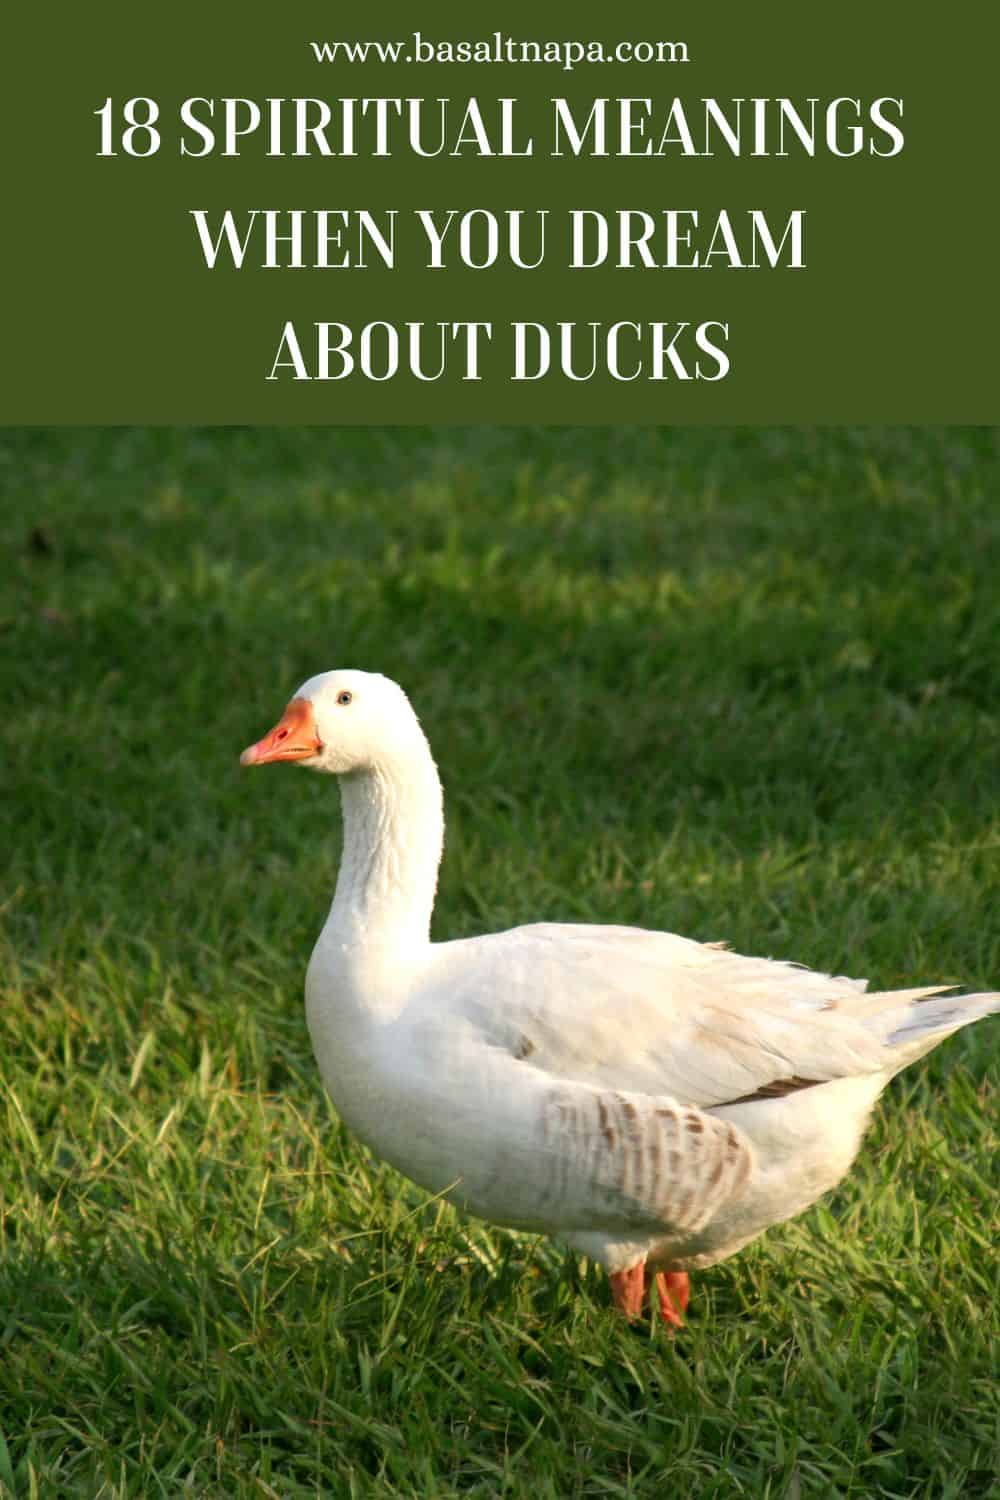 18 Spiritual Meanings When You Dream About Ducks